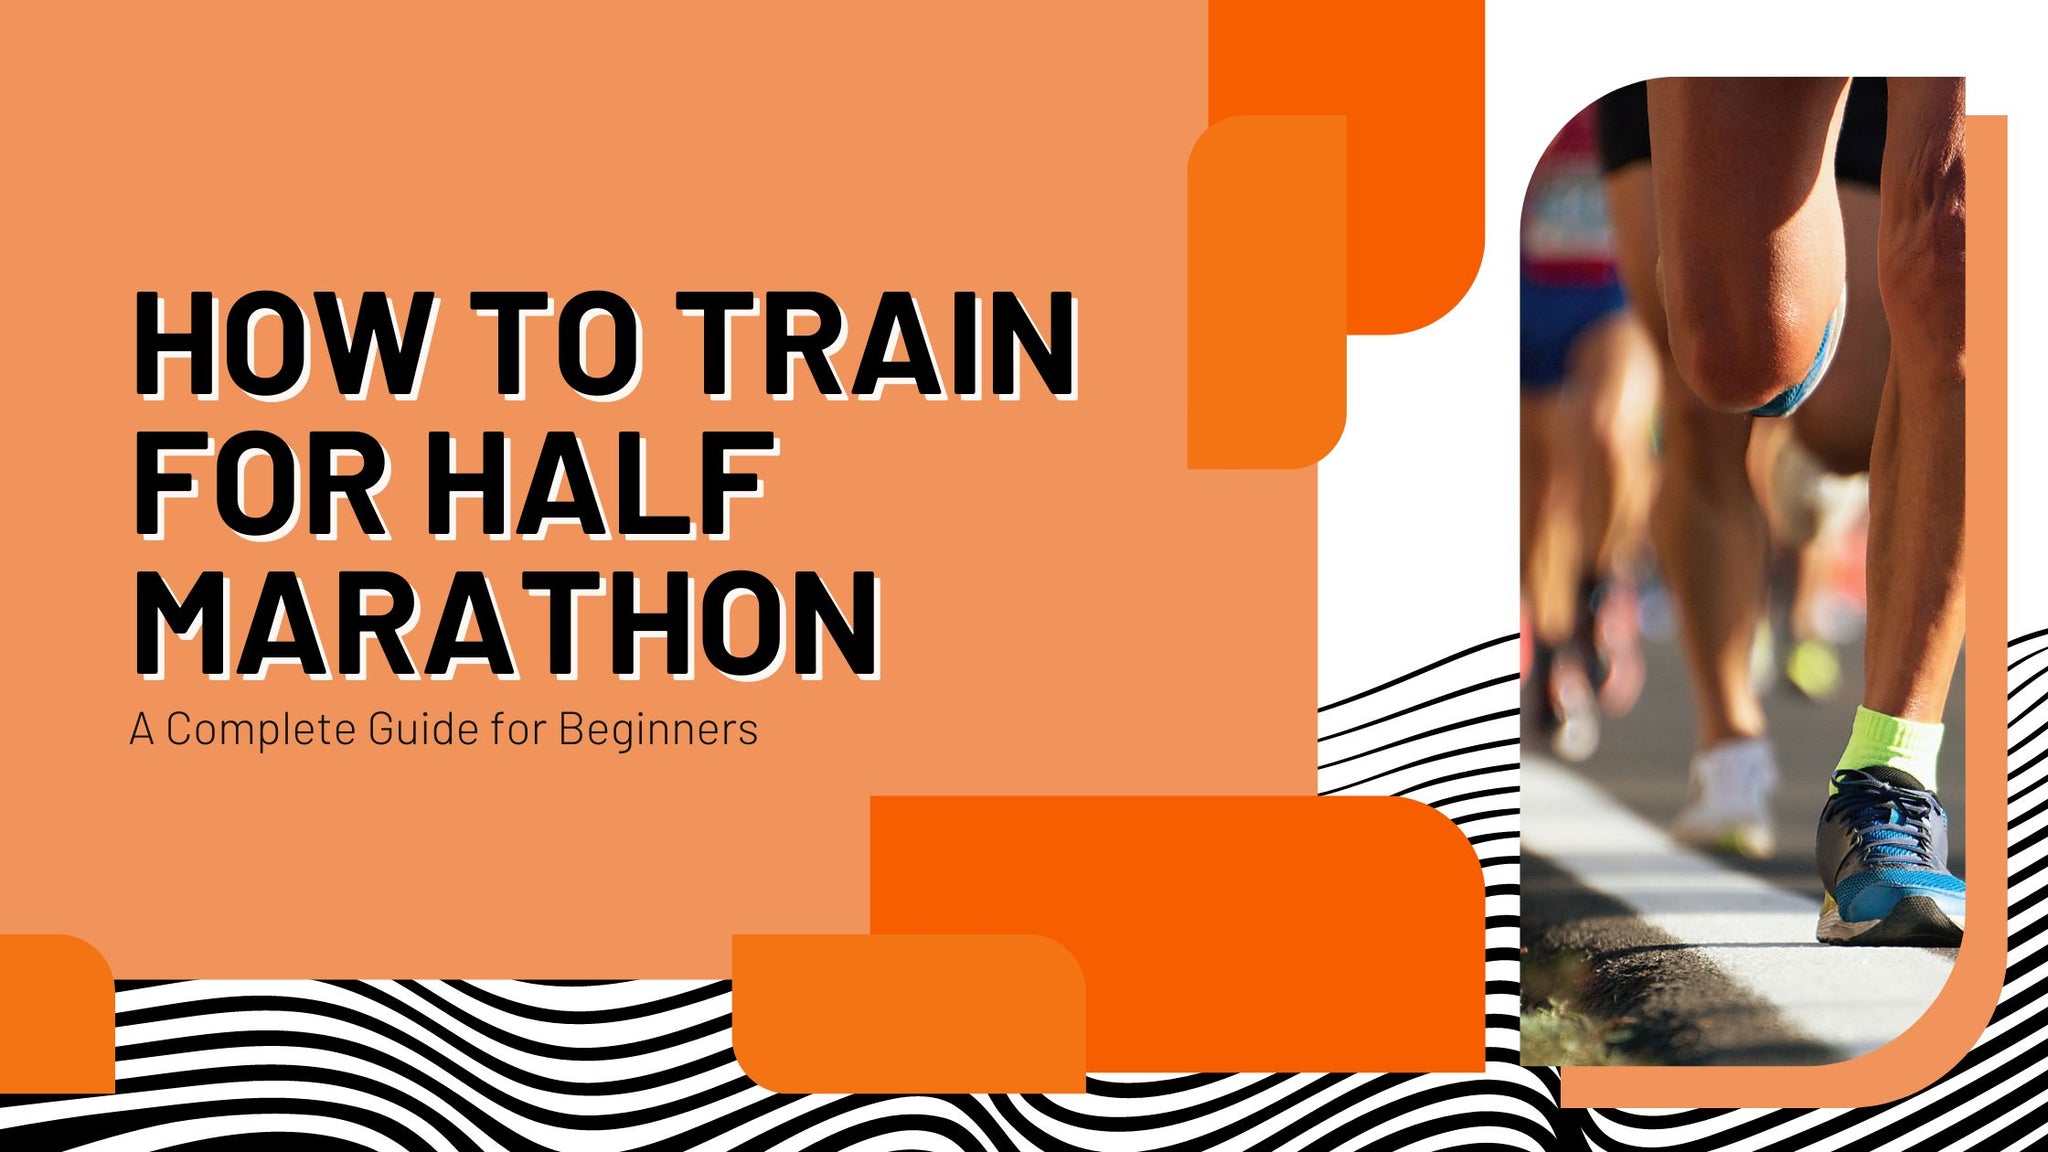 How to Train for Half Marathon as a Beginner - The Complete Guide